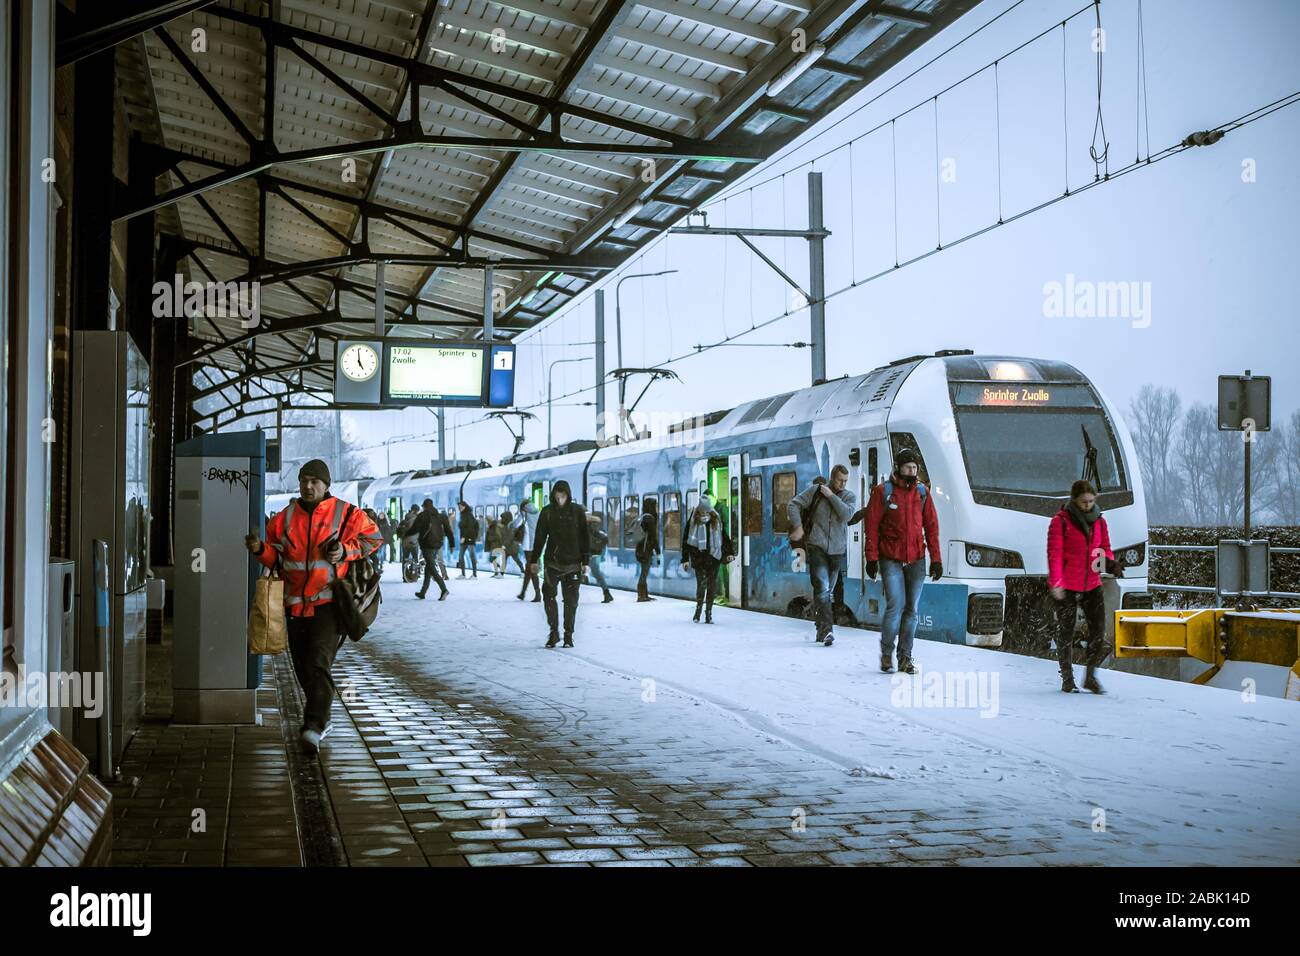 During late afternoon, a Keolis train from Zwolle has arrived in snow covered Kampen, Netherlands. Stock Photo